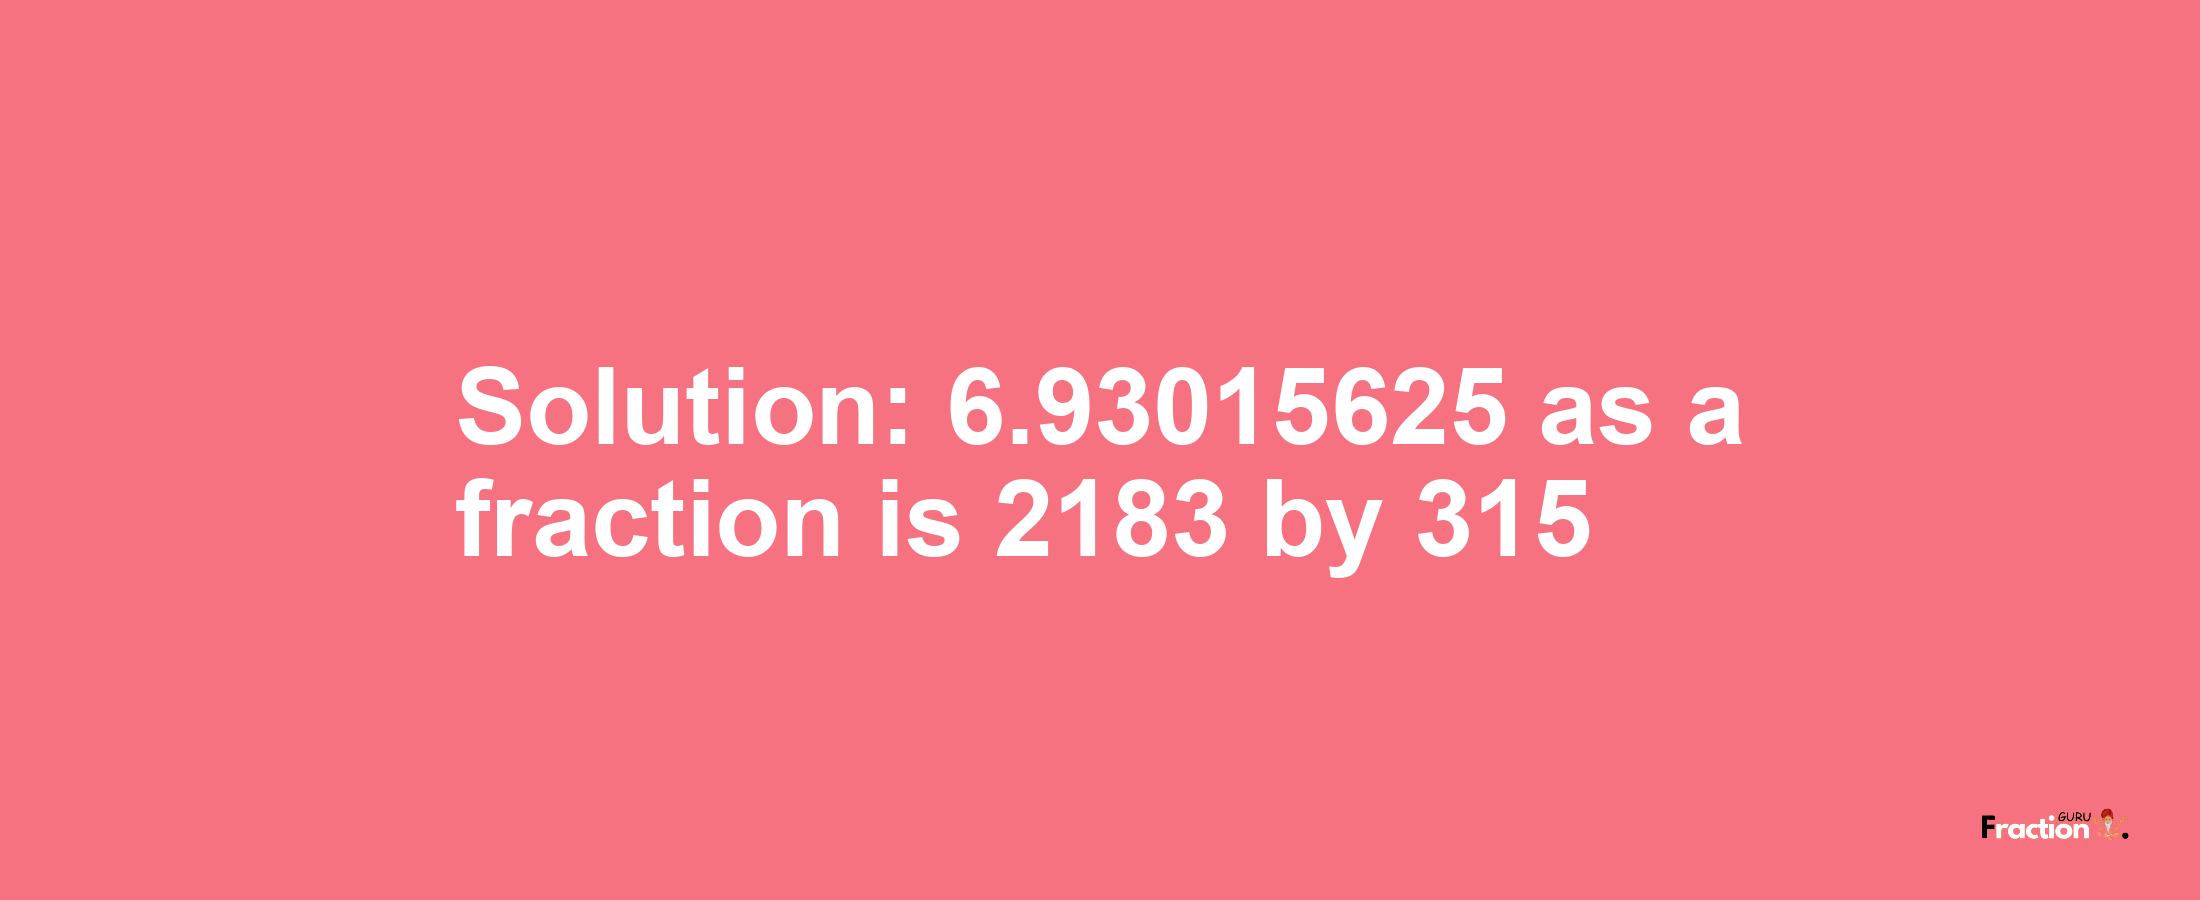 Solution:6.93015625 as a fraction is 2183/315